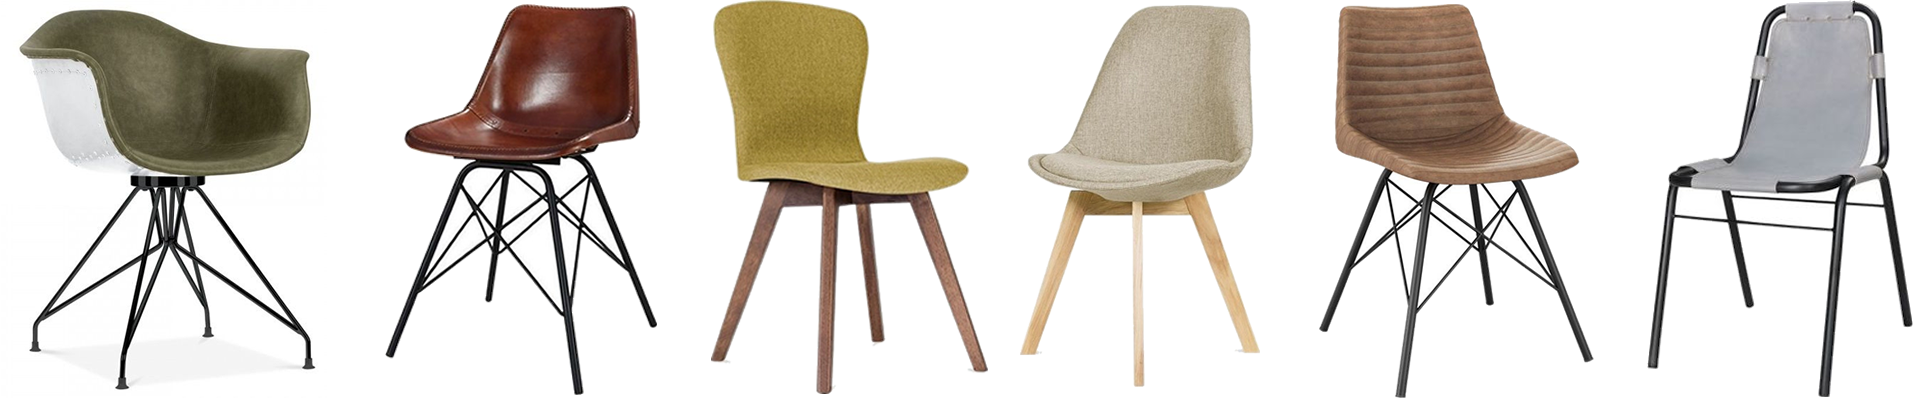 Upholstered Dining Chairs | Leather, Fabric & Faux Leather Chairs